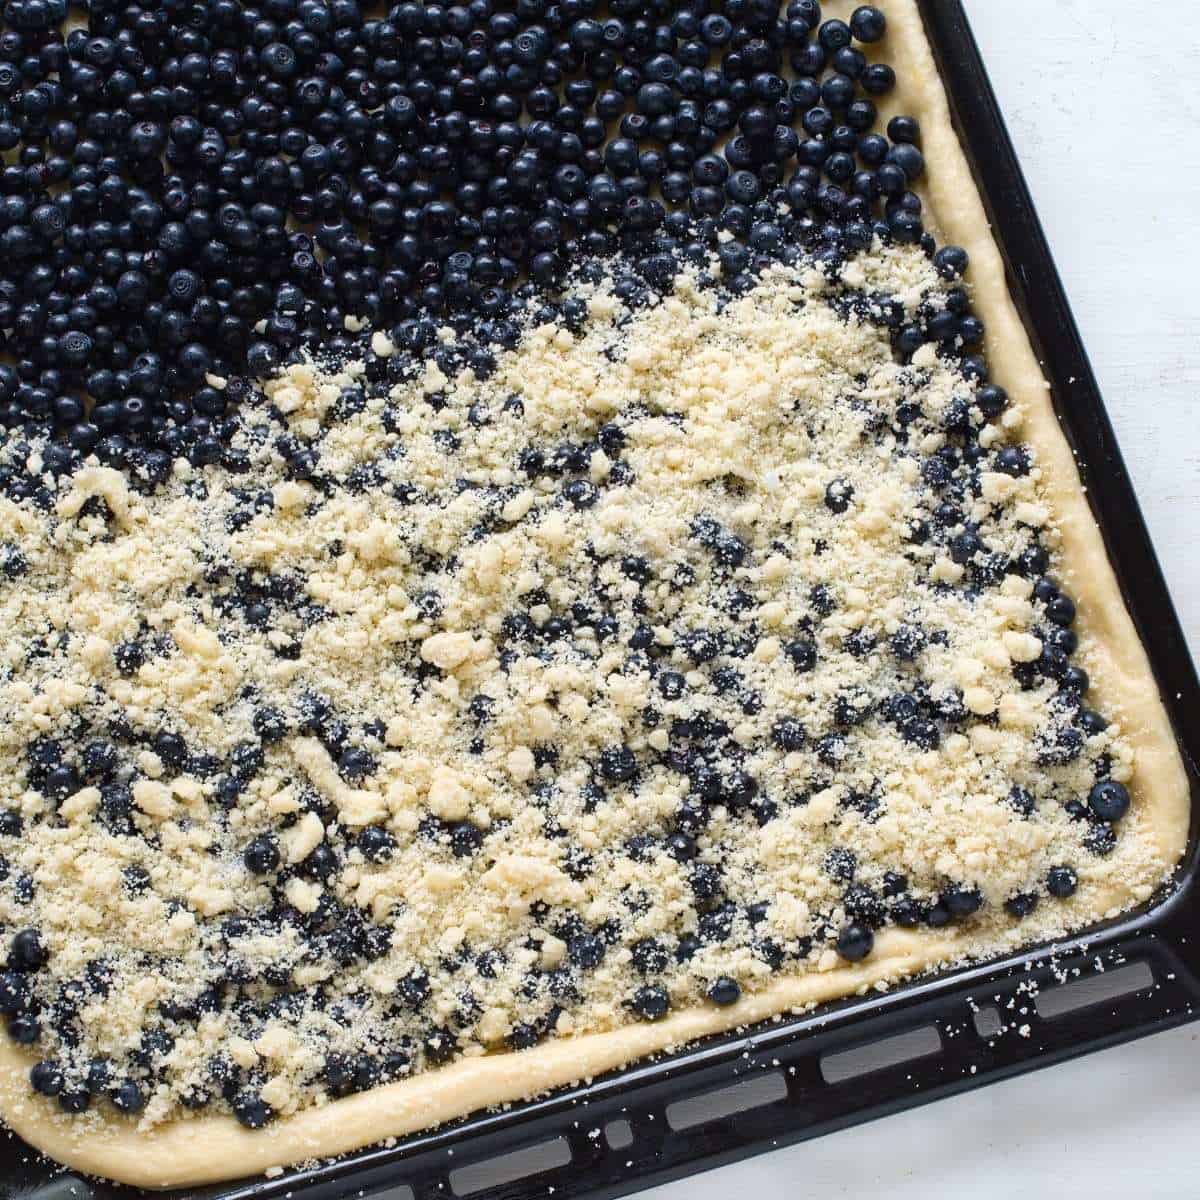 Topping yeasted dough with blueberries and streusel topping.